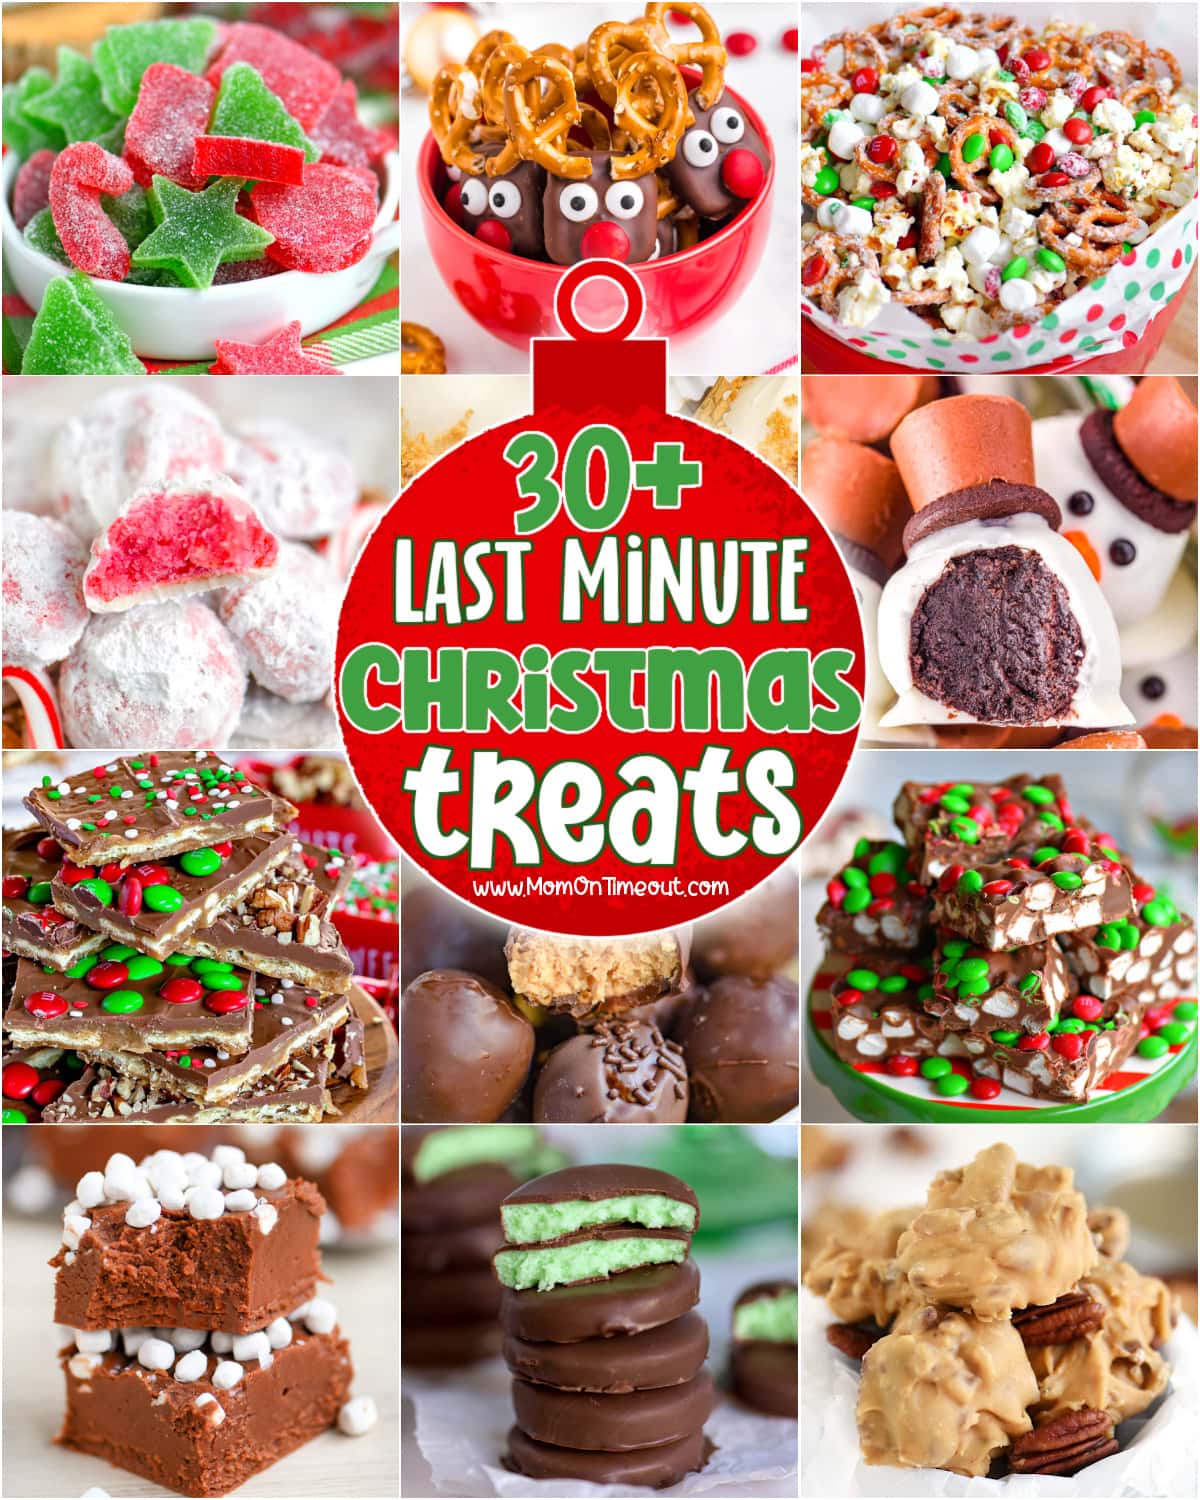 12 image collage showing quick and easy christmas treats that can be made at the last minute.